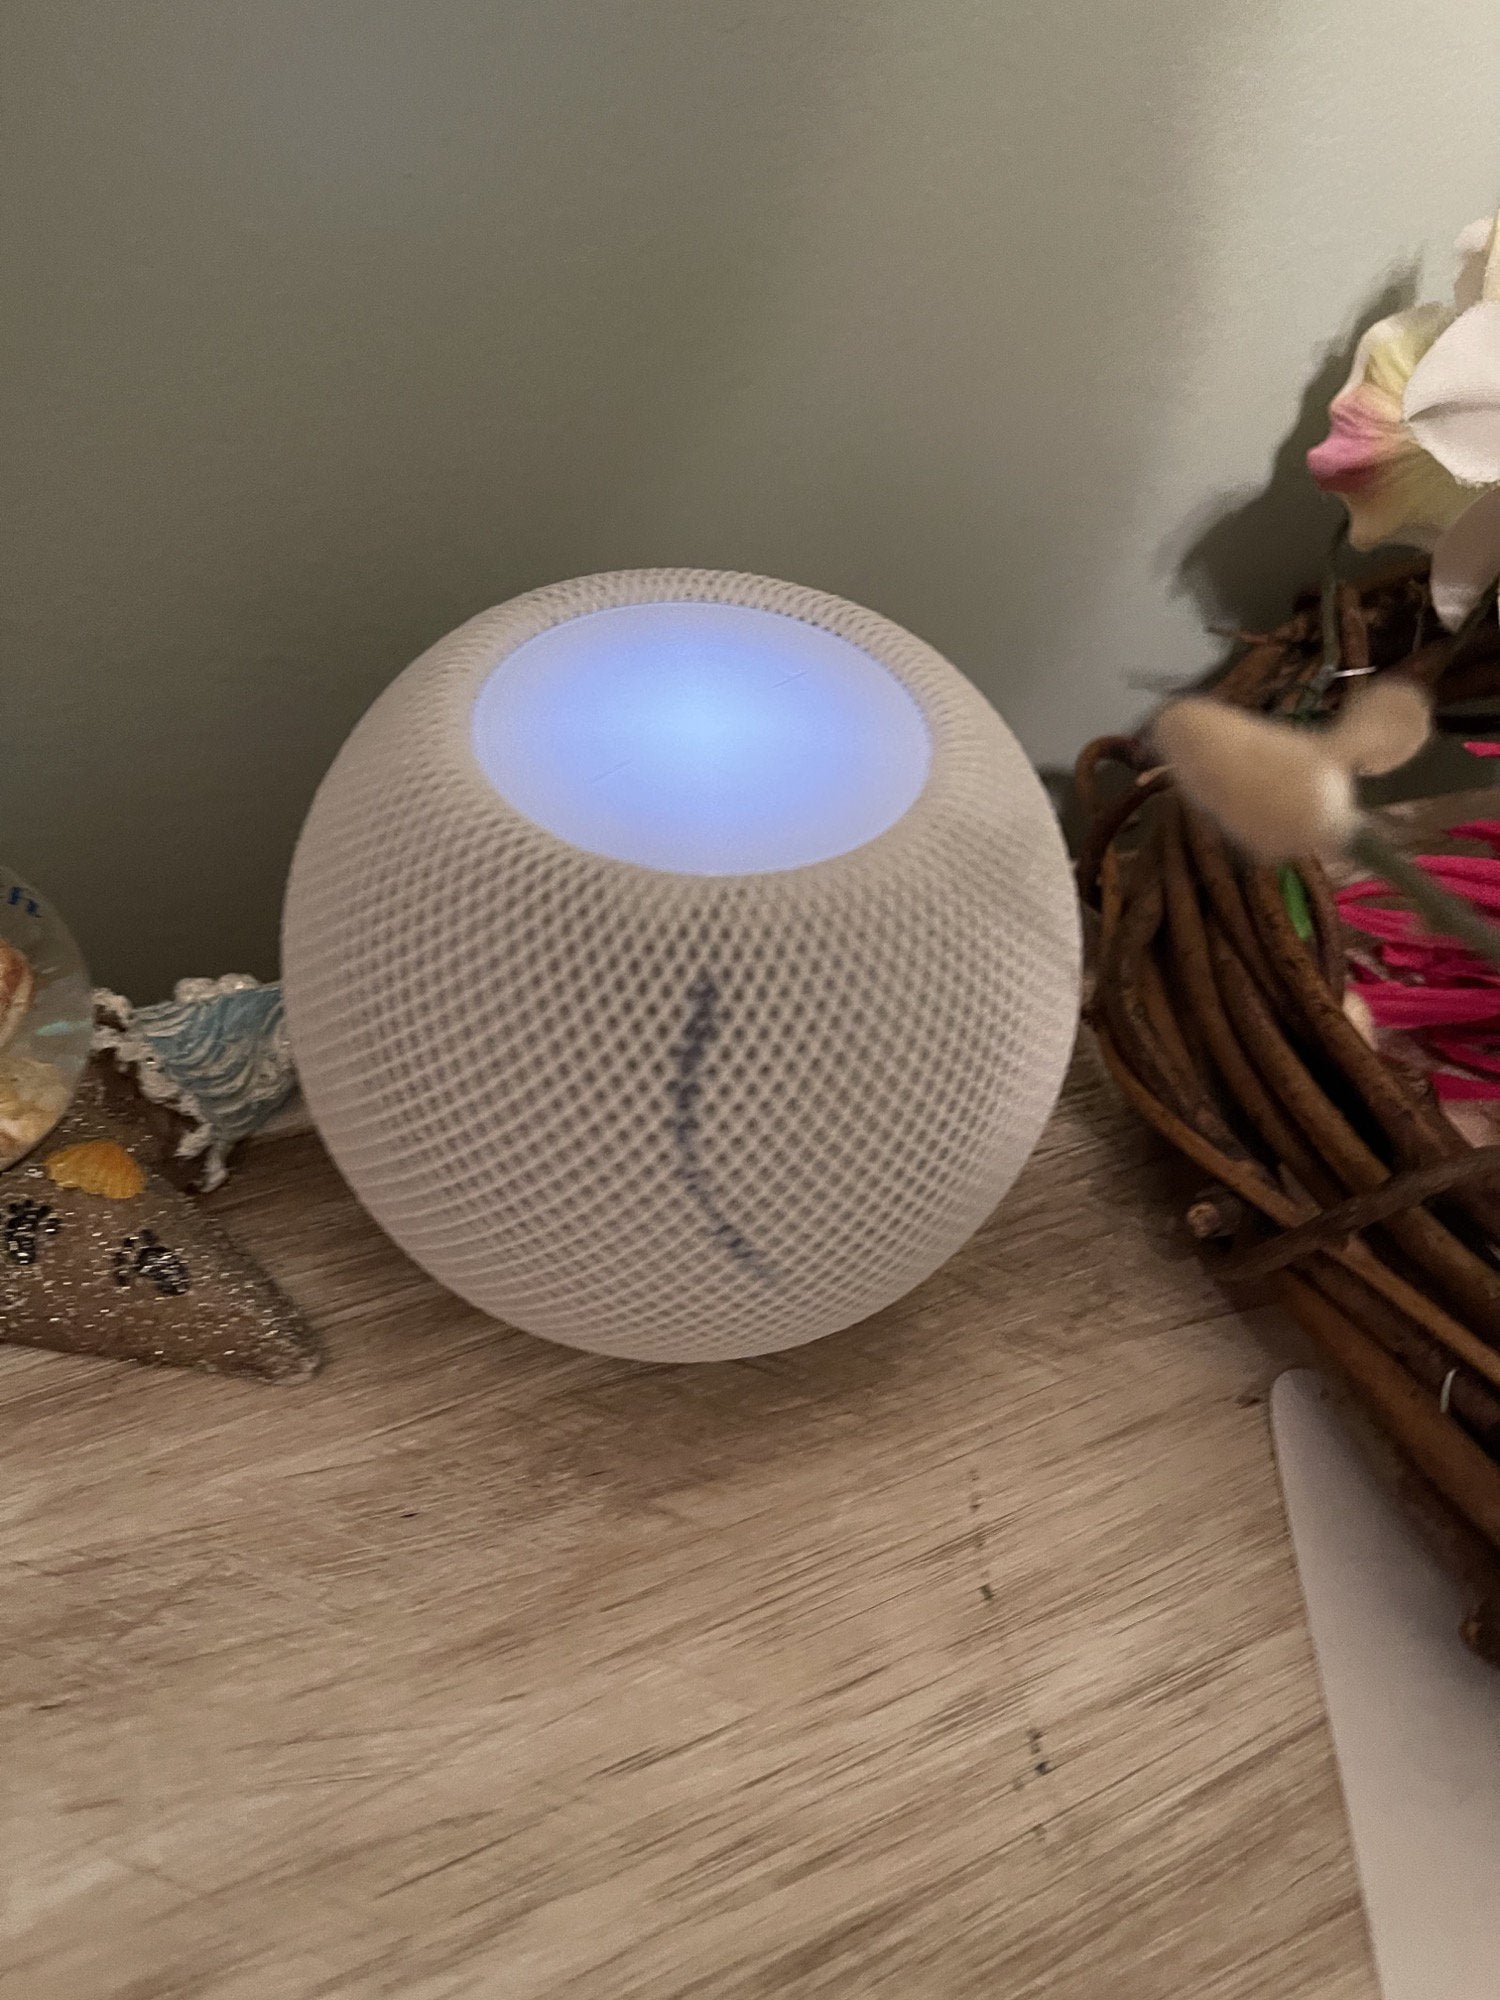 Dry wipe marker on HomePod Do you have any suggestions